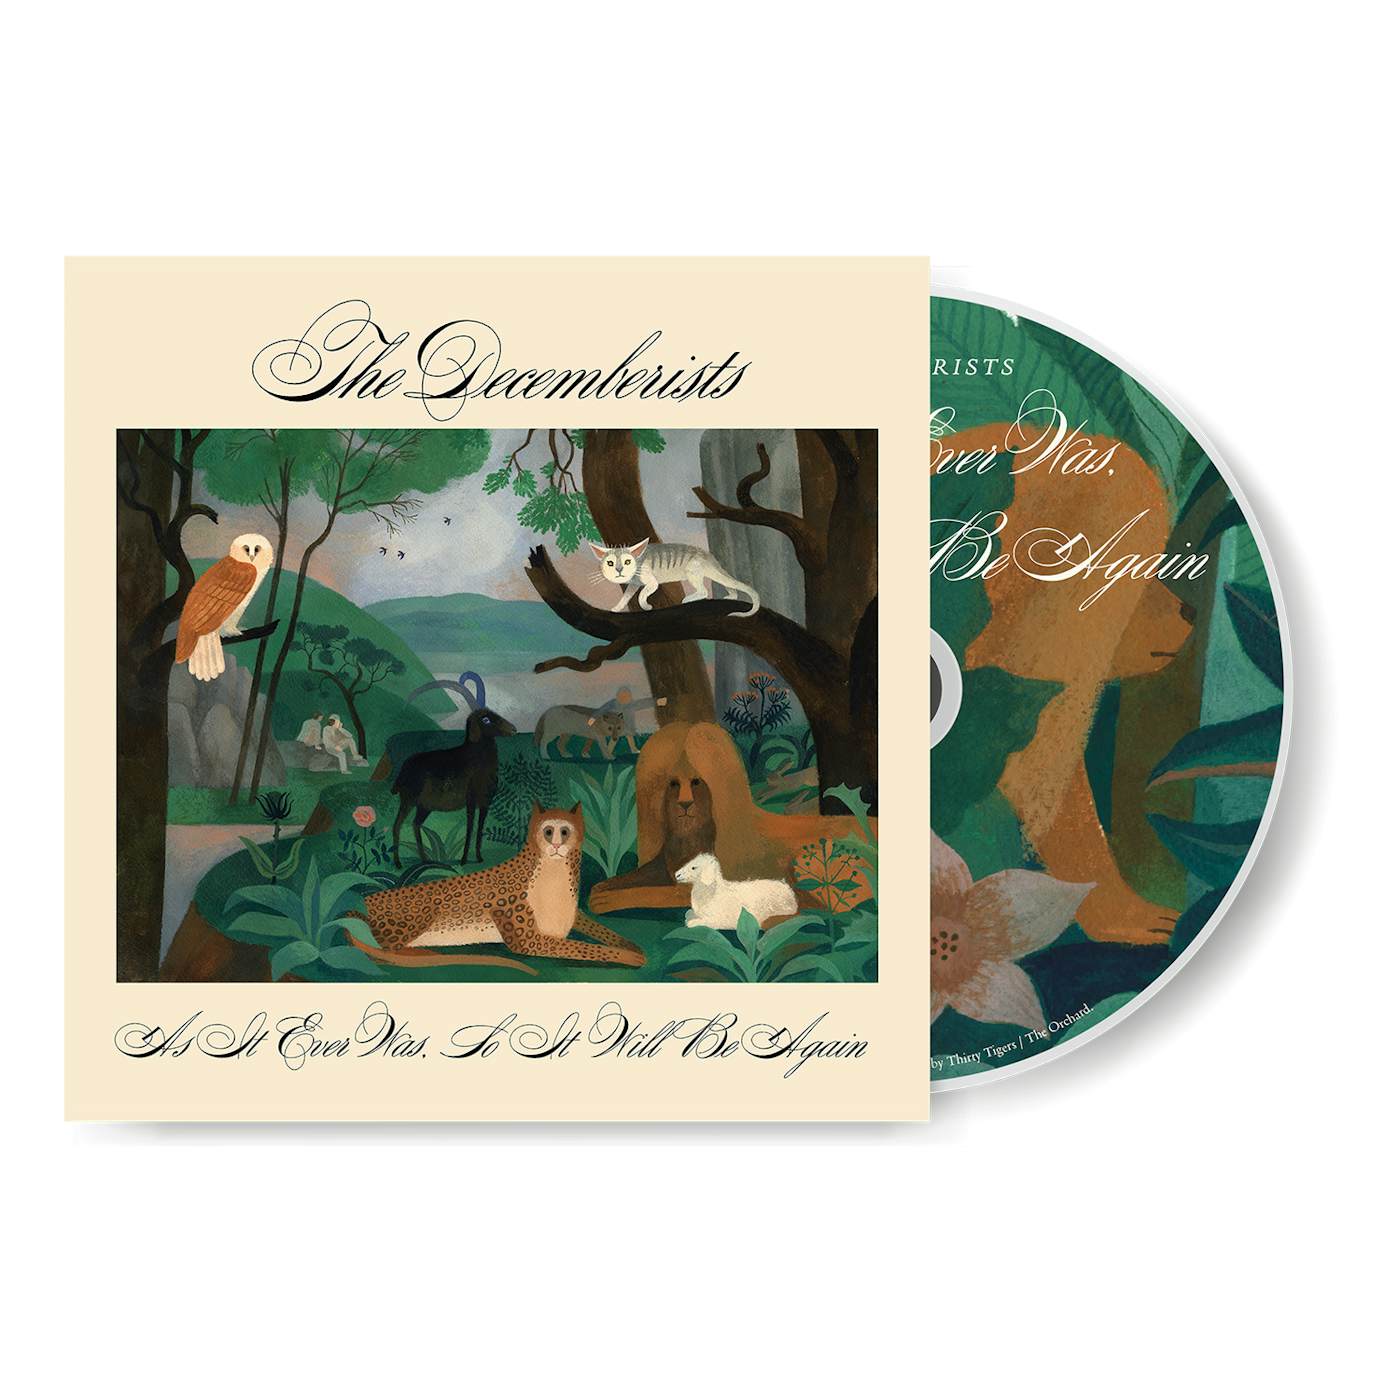 The Decemberists As It Ever Was, So It Will Be Again CD